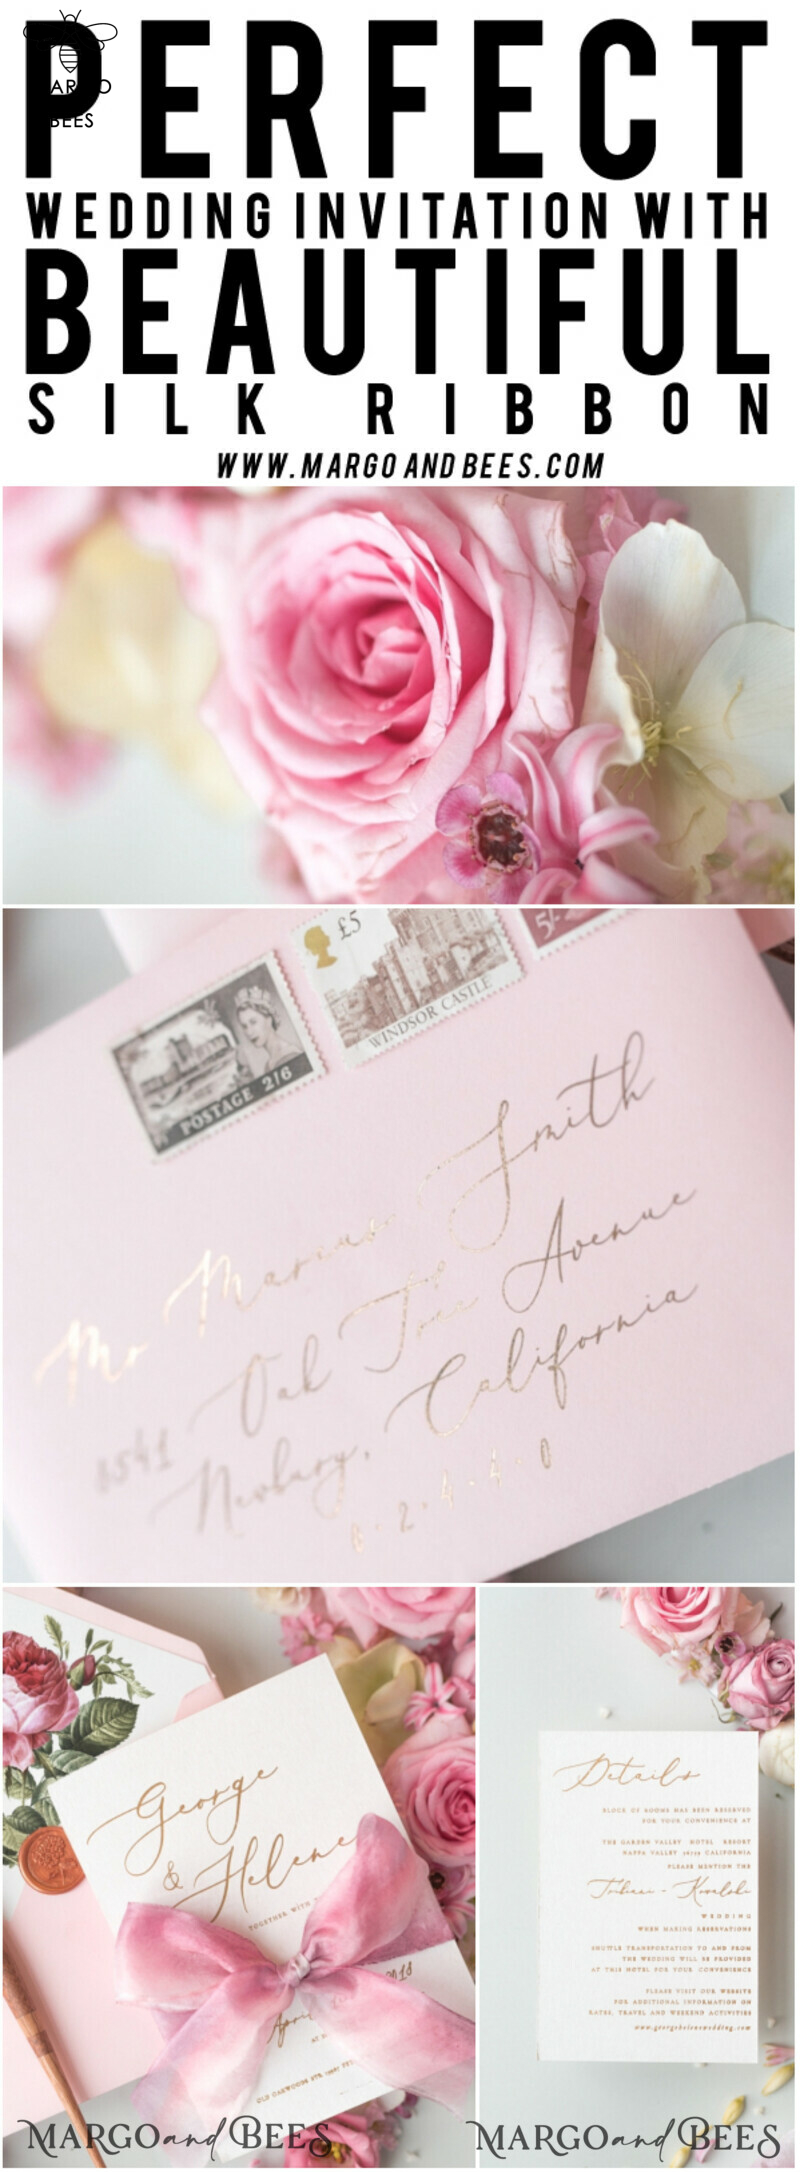 Elegant Personalized Wedding Invitations Romantic Stationery with Vintage Garden Roses and  Handmade Silk Bow Gold Foil Letters  Blush Pink Envelope -46